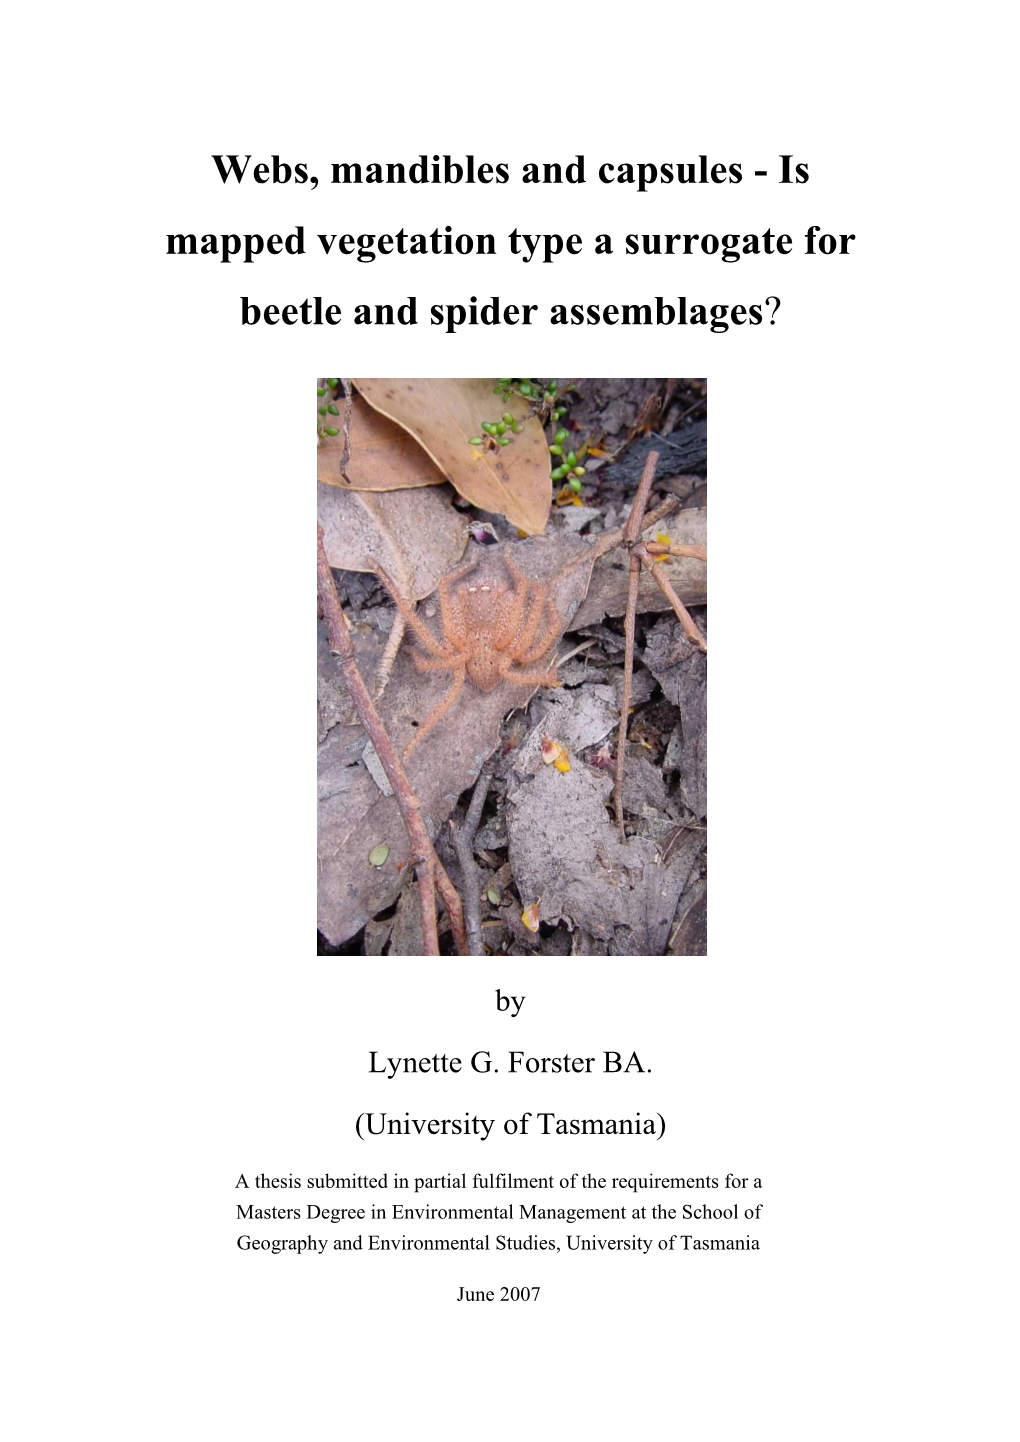 Webs, Mandibles and Capsules - Is Mapped Vegetation Type a Surrogate for Beetle and Spider Assemblages?